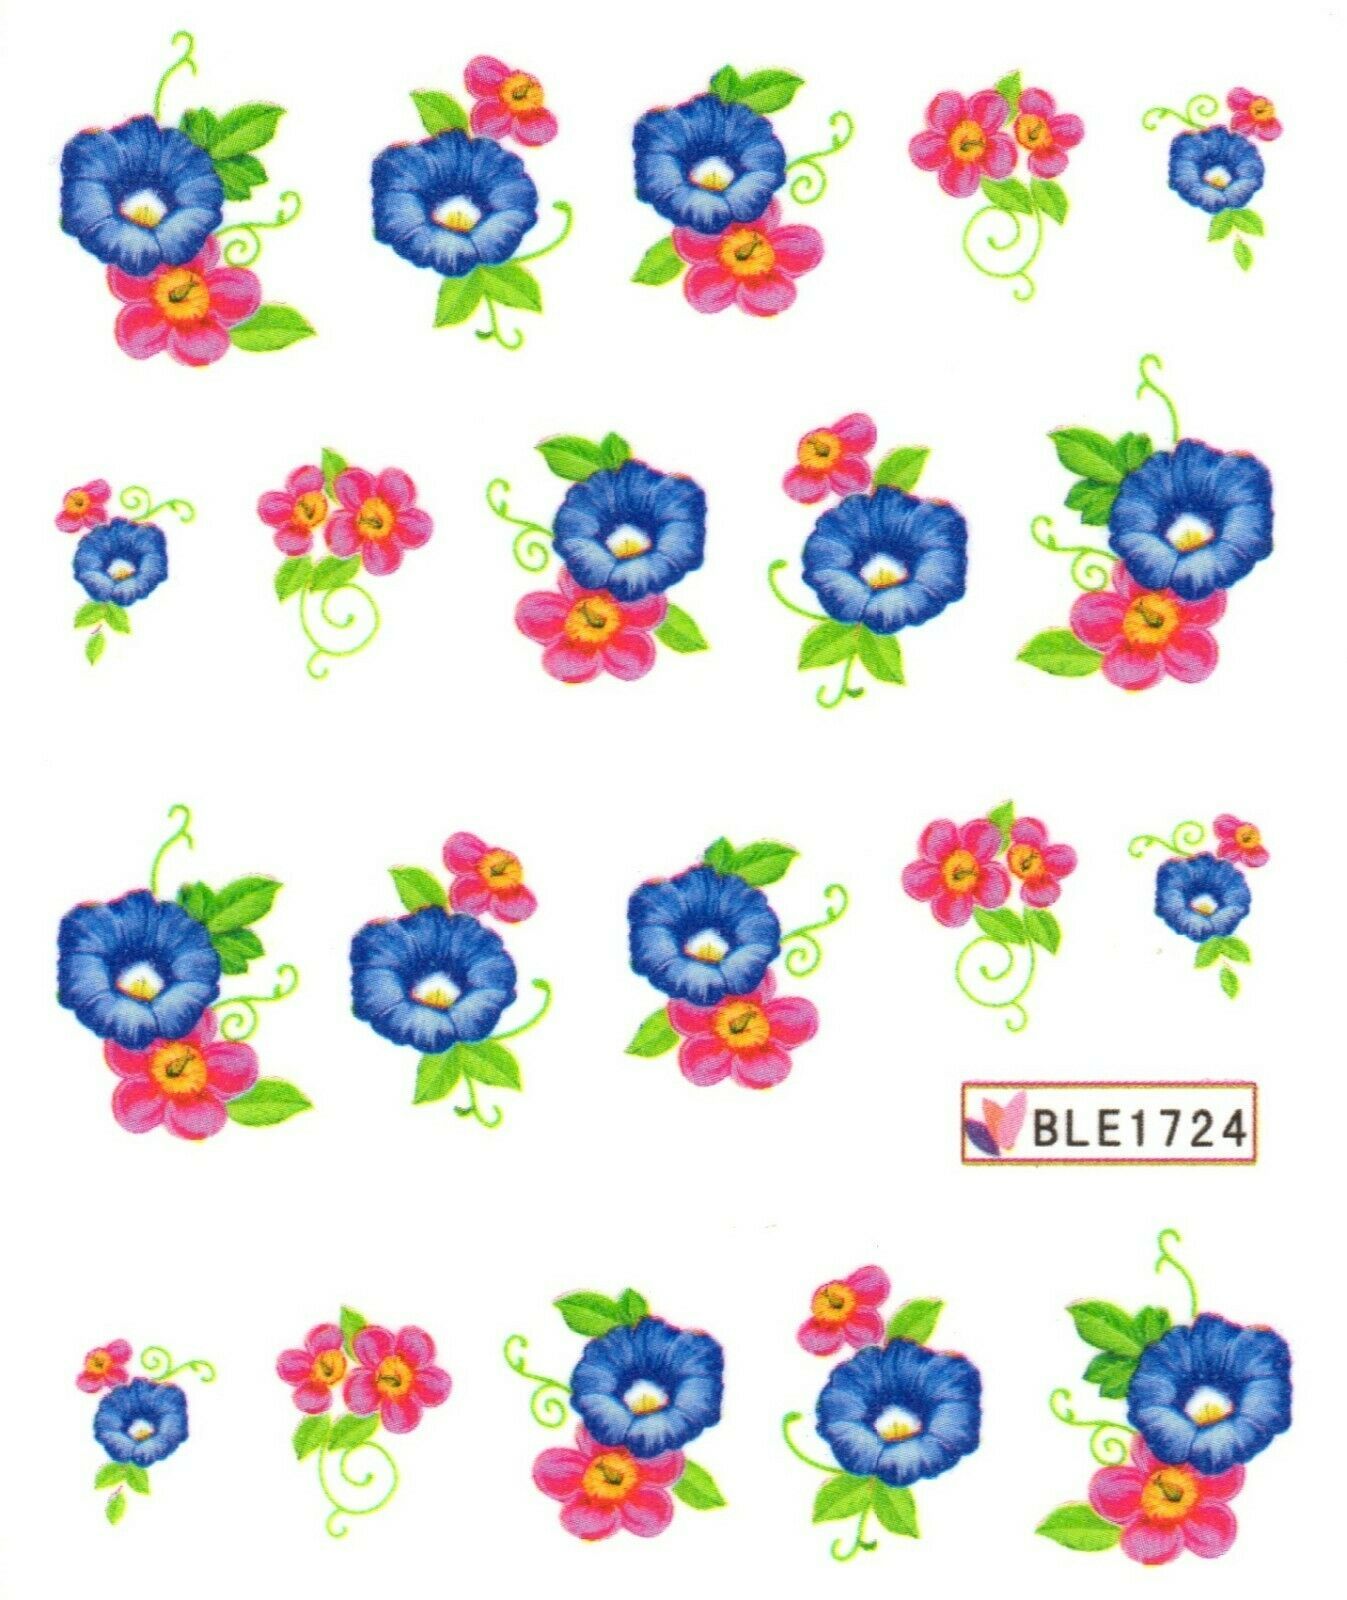 Nail Art Water Transfer Sticker Decal Stickers Pretty Flowers Pink Blue BLE1724